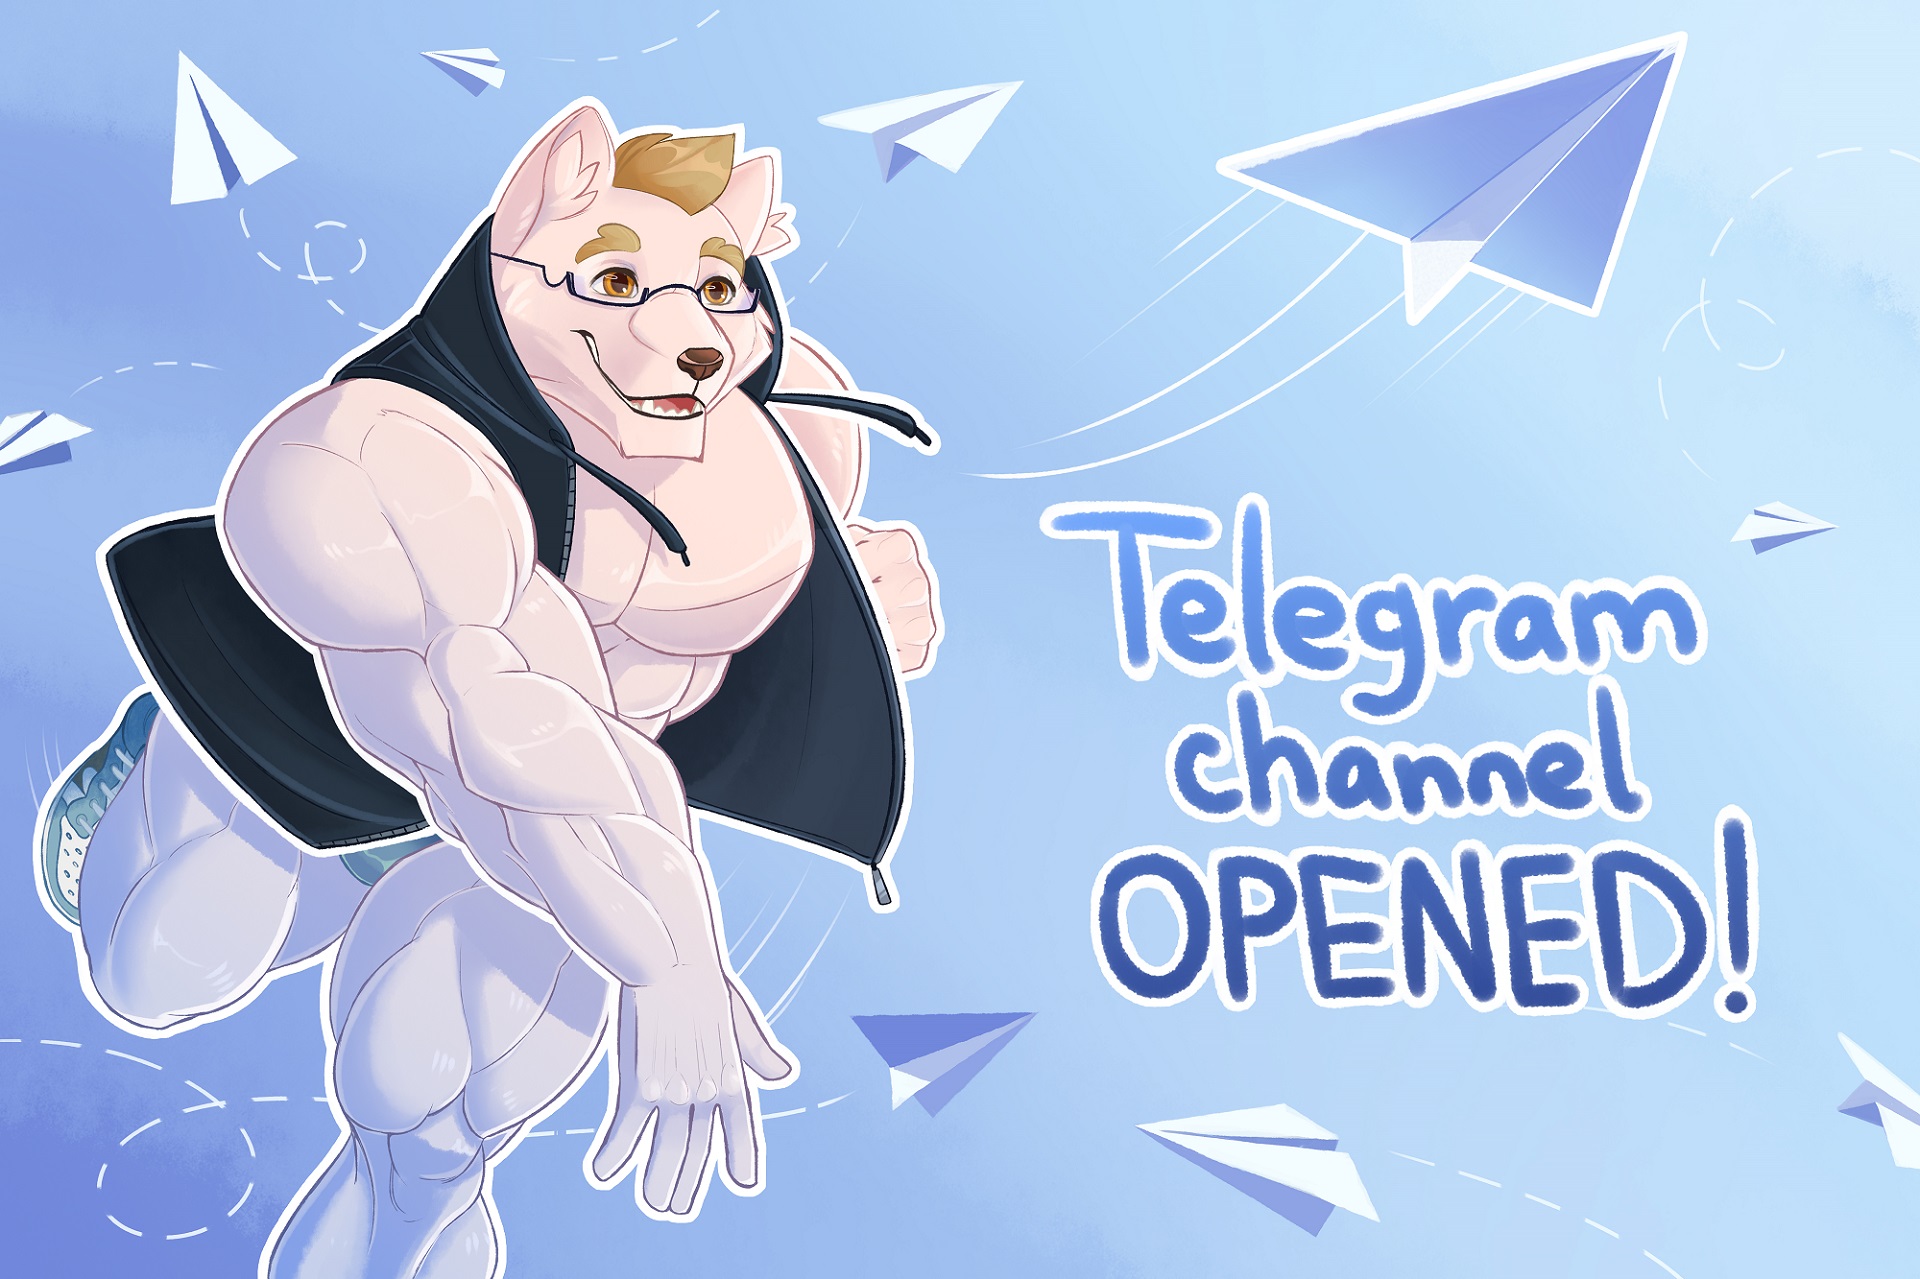 Telegram channel opened! - Run, Kitty! by Strong & Furry